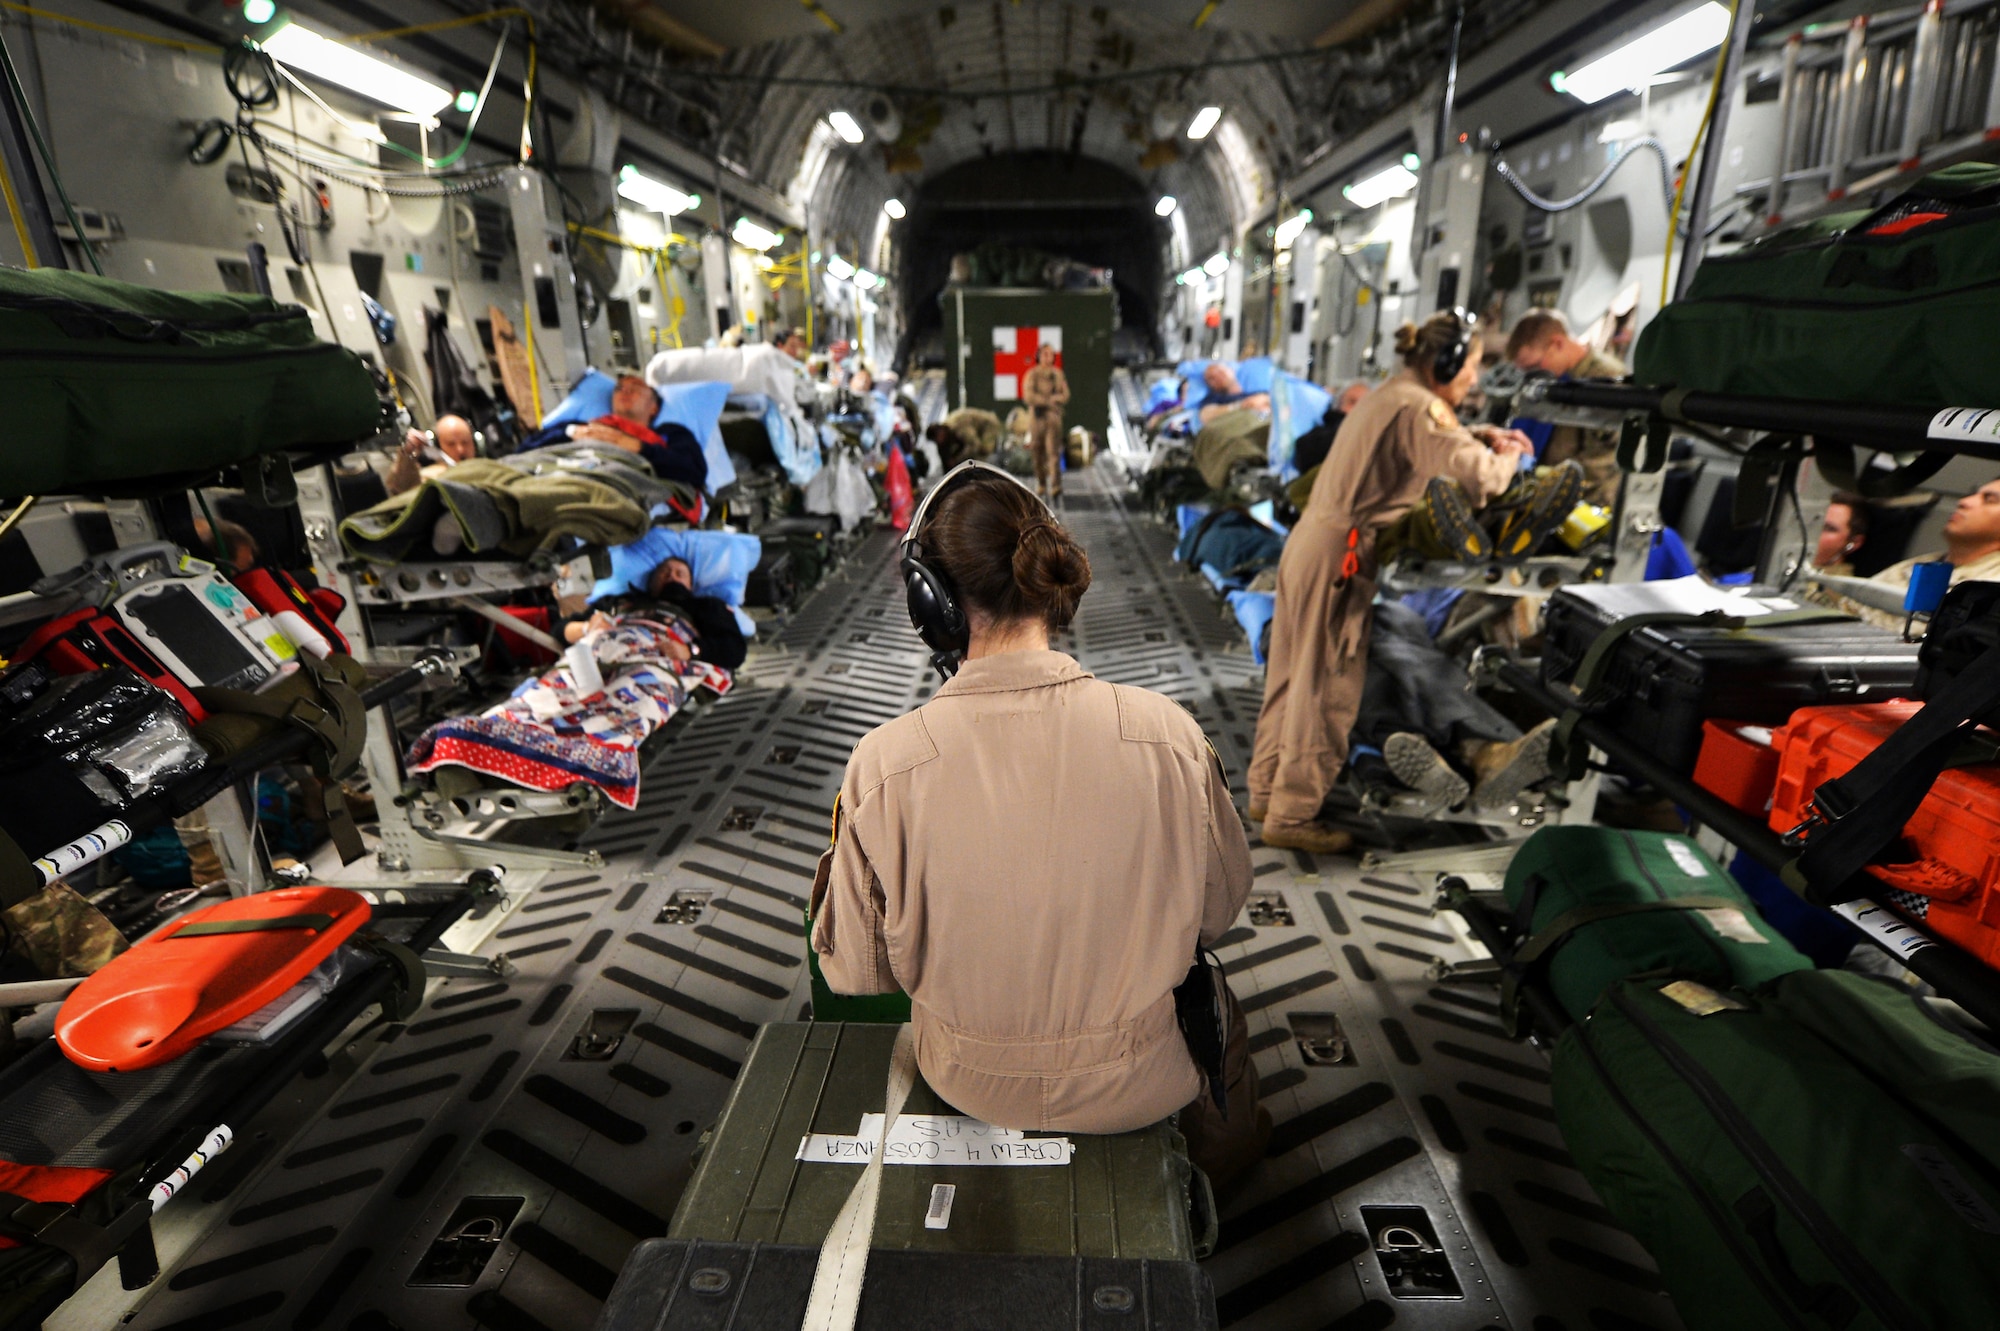 Members of the of a 455th Expeditionary Aeromedical Evacuation Squadron Critical Care Air Transport Team assist patients on a C-17 Globemaster III medical transport flight, out of Bagram Airfield, Afghanistan, March 21, 2013. Air Force Medicine is expanding aeromedical evacuation and CCATT capacity as it prepares to deliver medical support in future conflicts. (U.S. Air Force photo by Senior Airman Chris Willis)